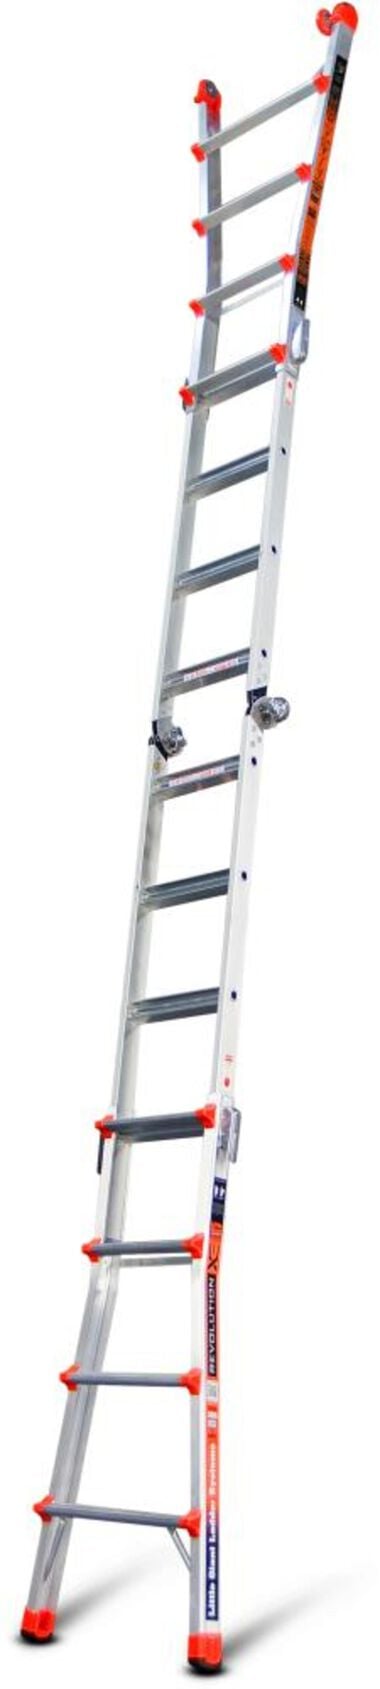 Little Giant Safety Revolution M17 Aluminum 300 lb Telescoping Type-1A Multi-Position Ladder, large image number 1